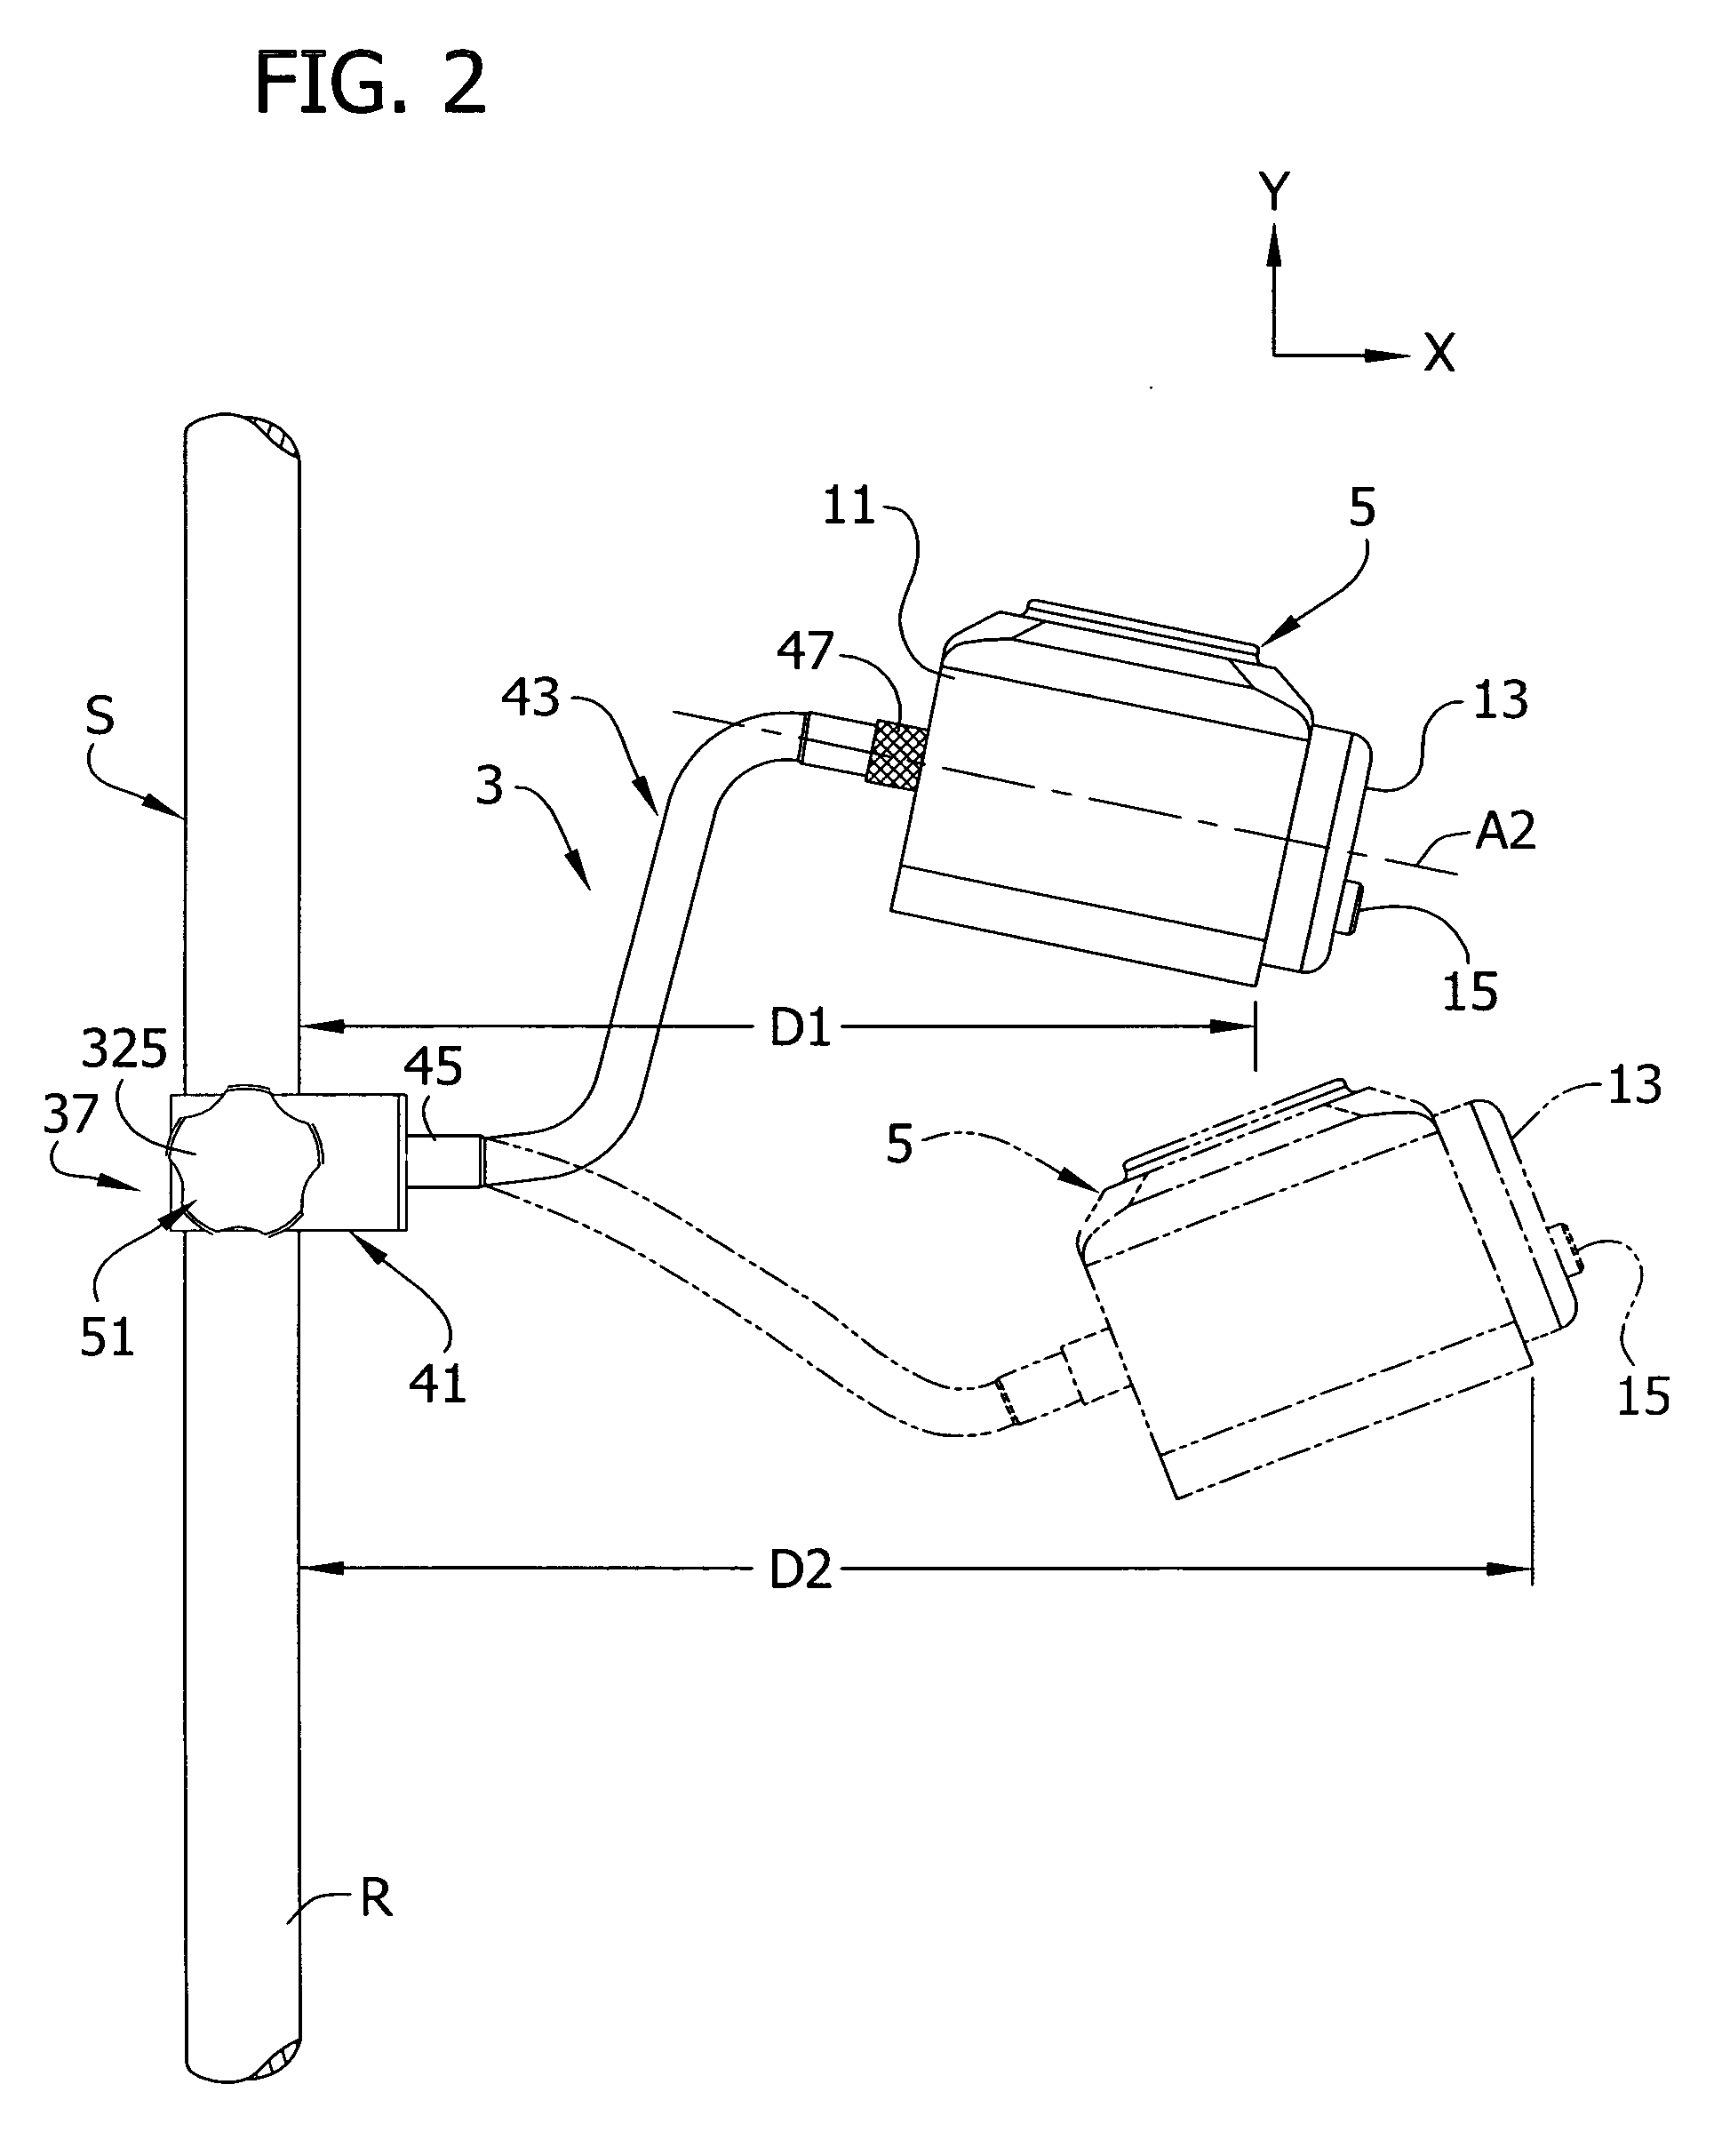 Flexible clamping apparatus for medical devices